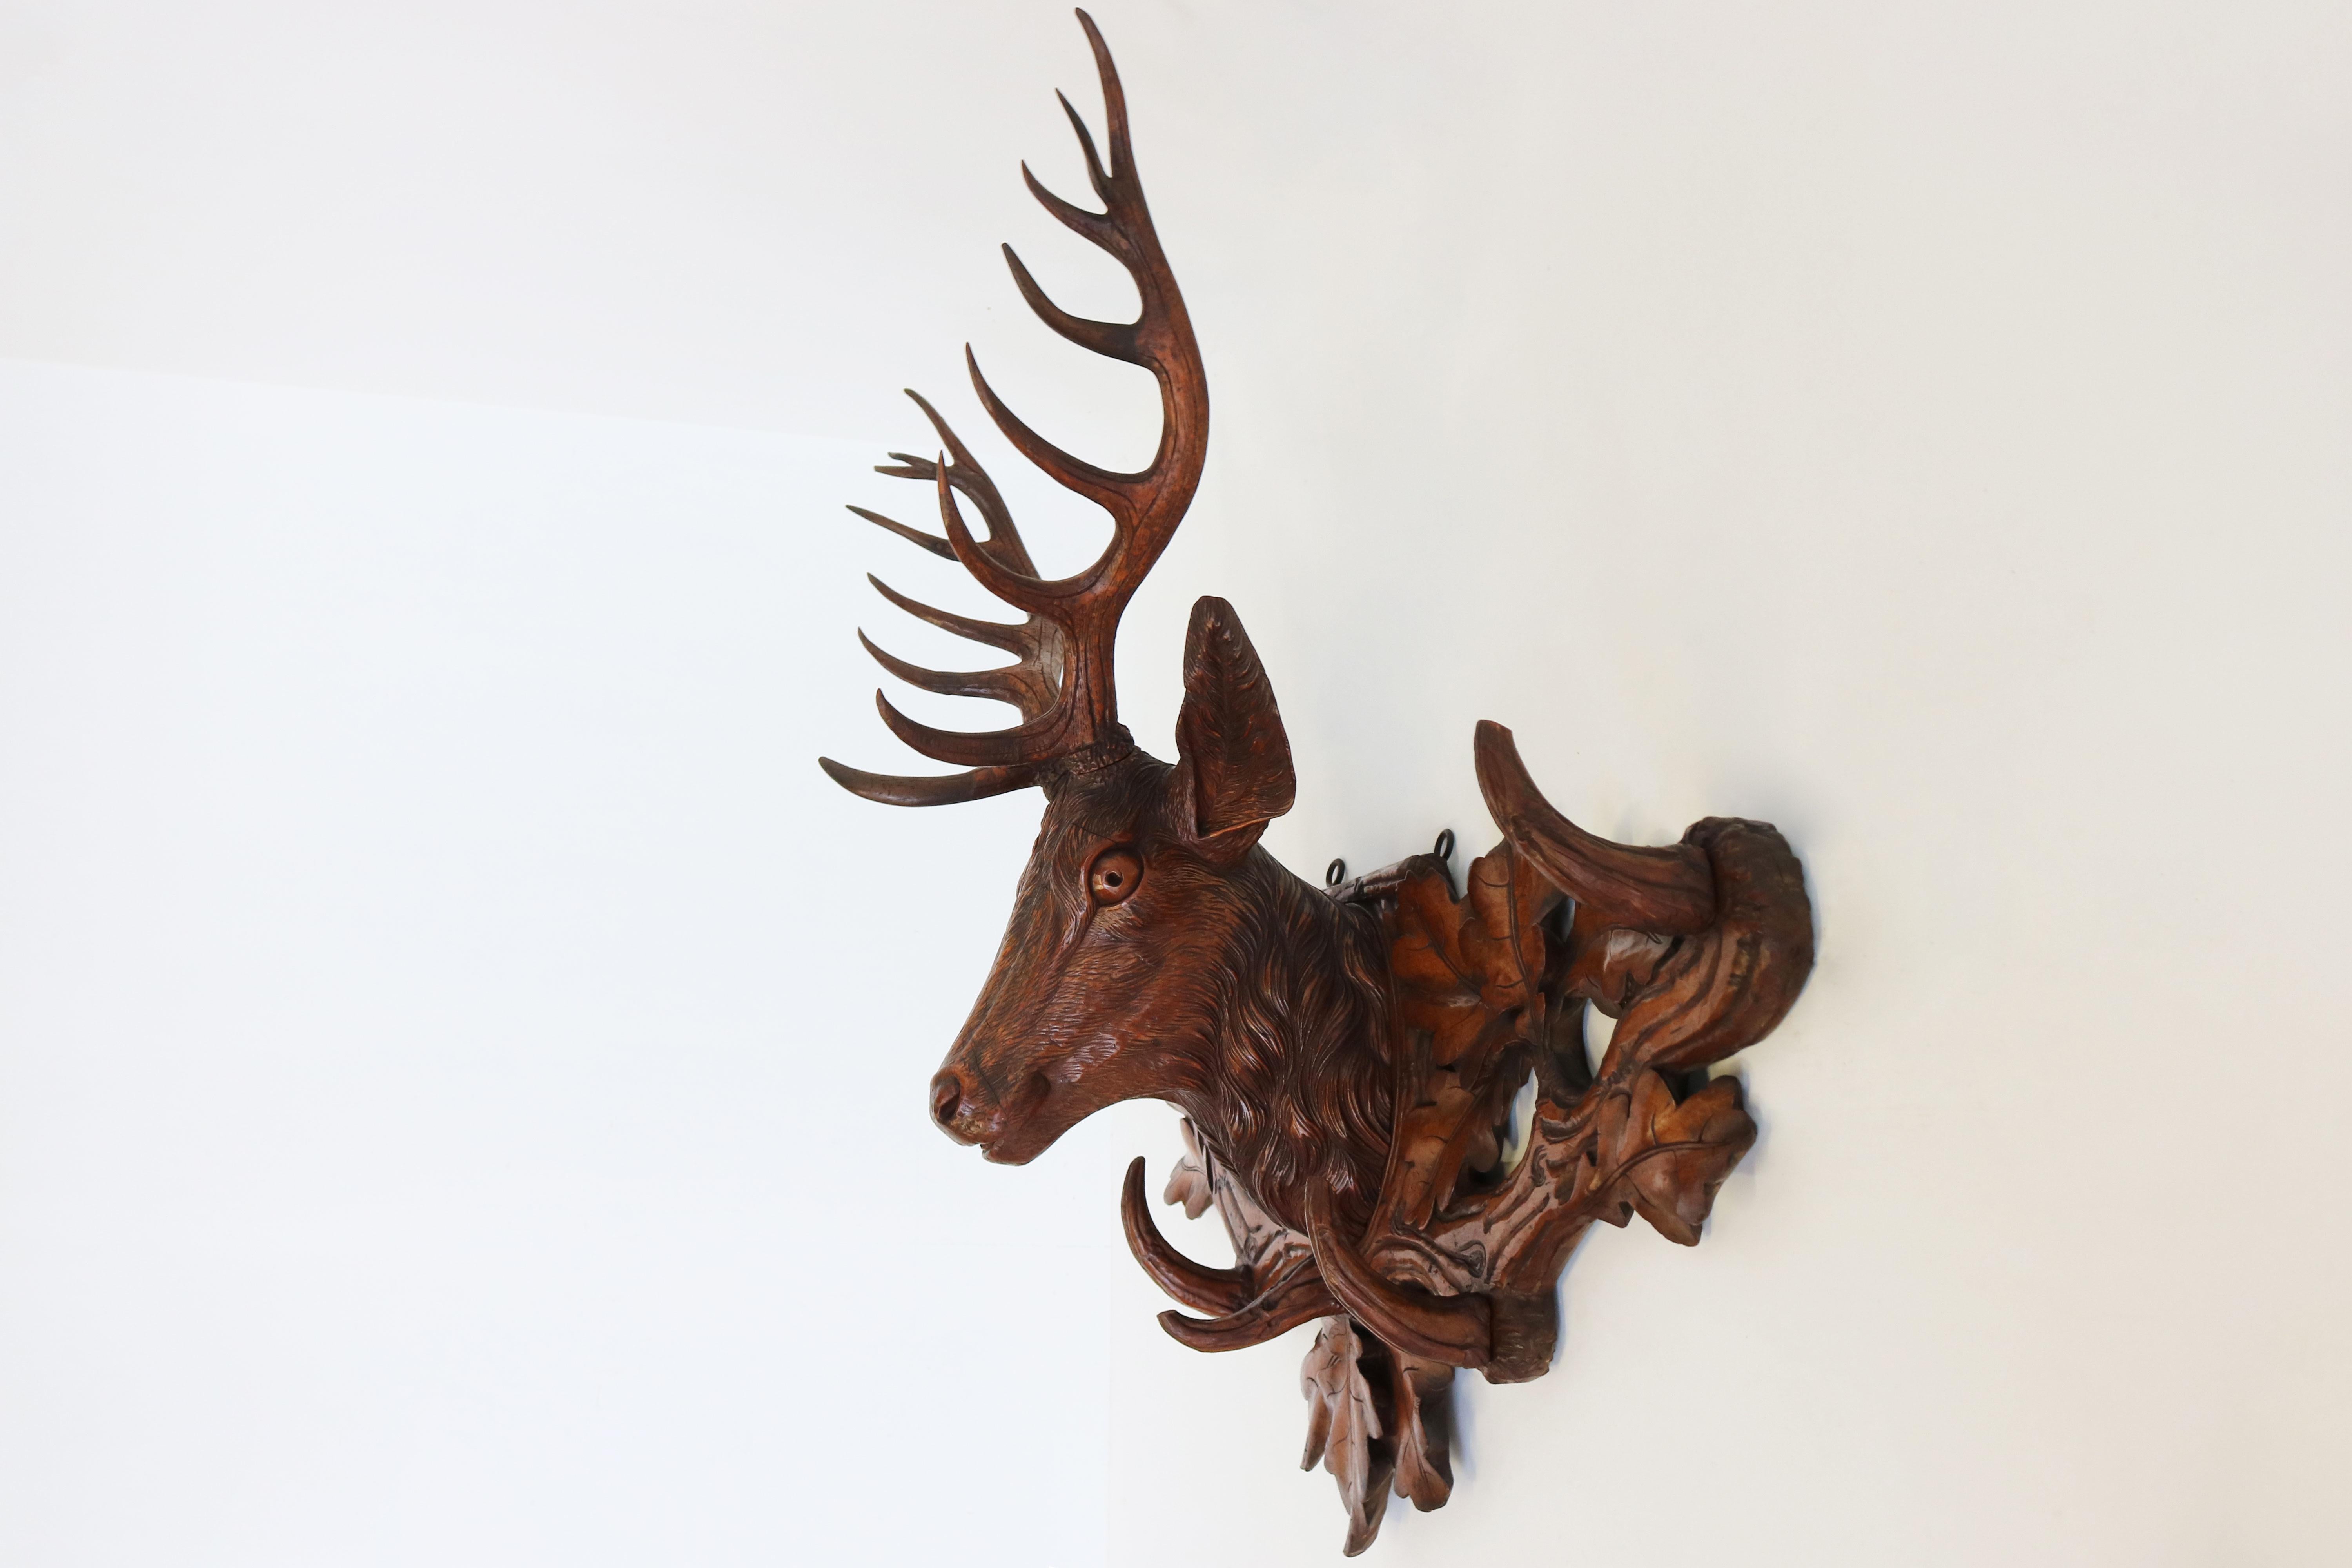 Wood Antique 19th Century Swiss Black Forest Stag Coat Rack / Hat Rack Carved Hallway